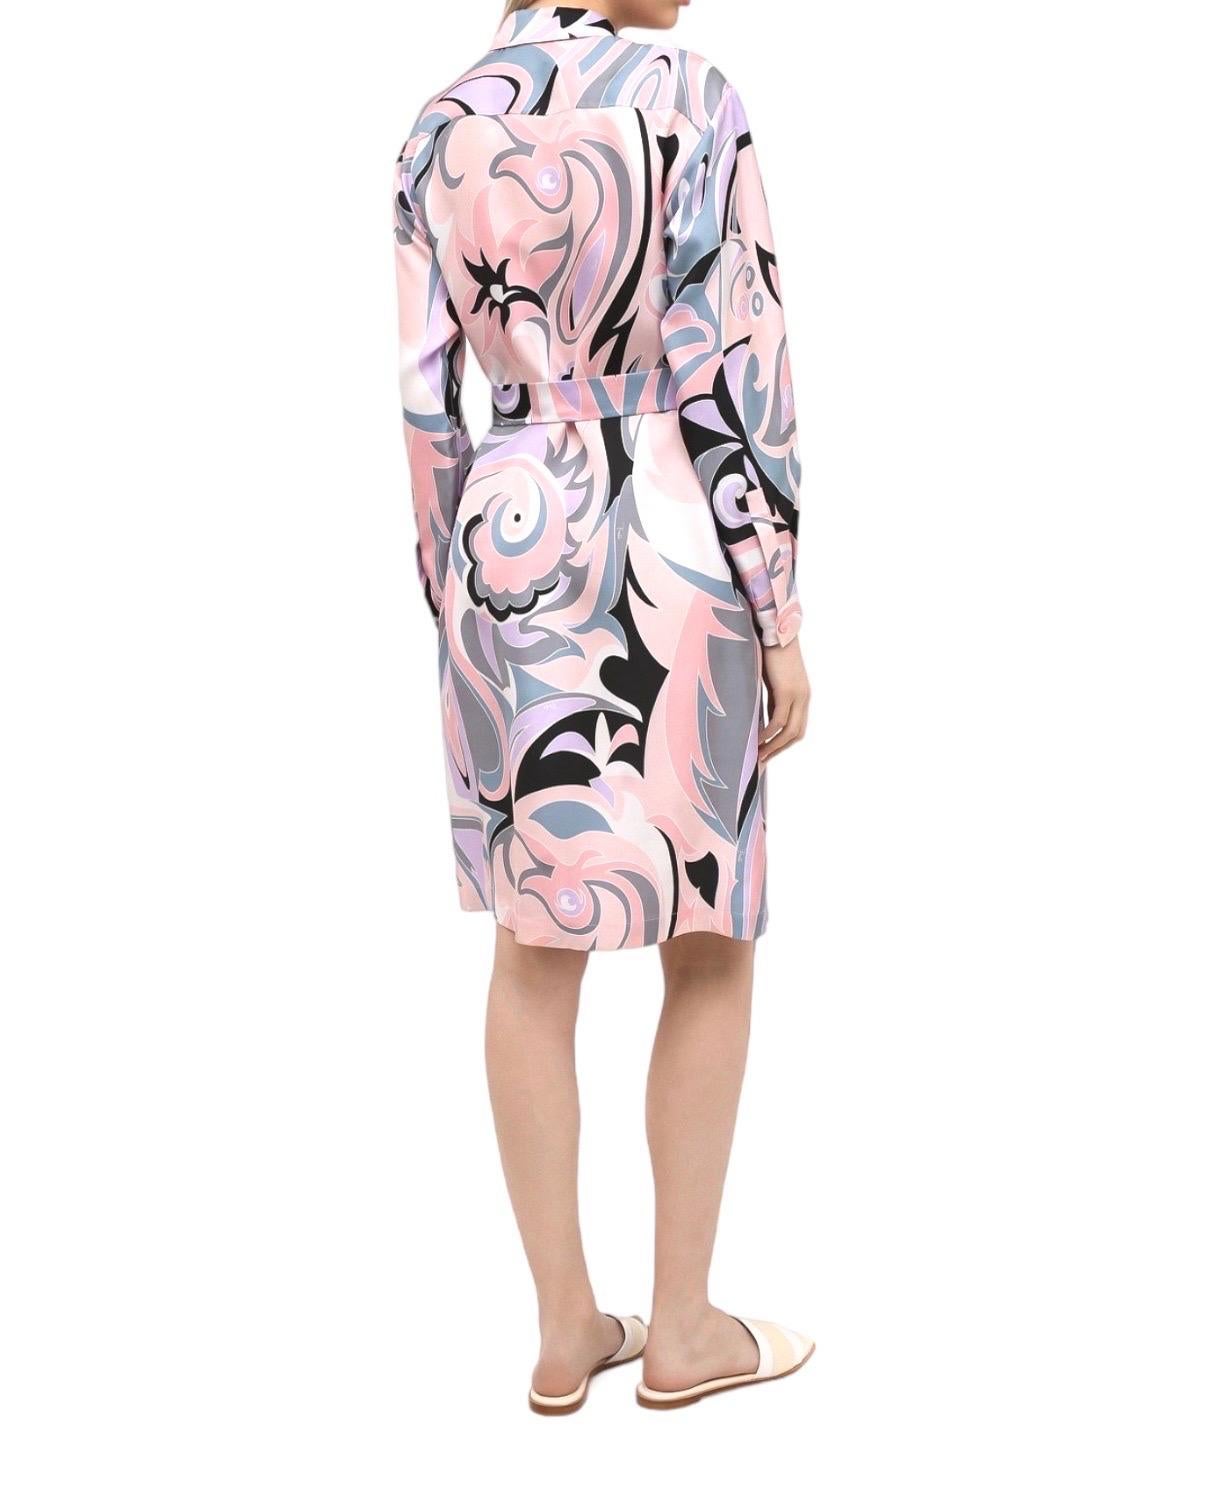 NEW Emilio Pucci Signature Print Silk Shirt Dress with Belt 44 For Sale 1